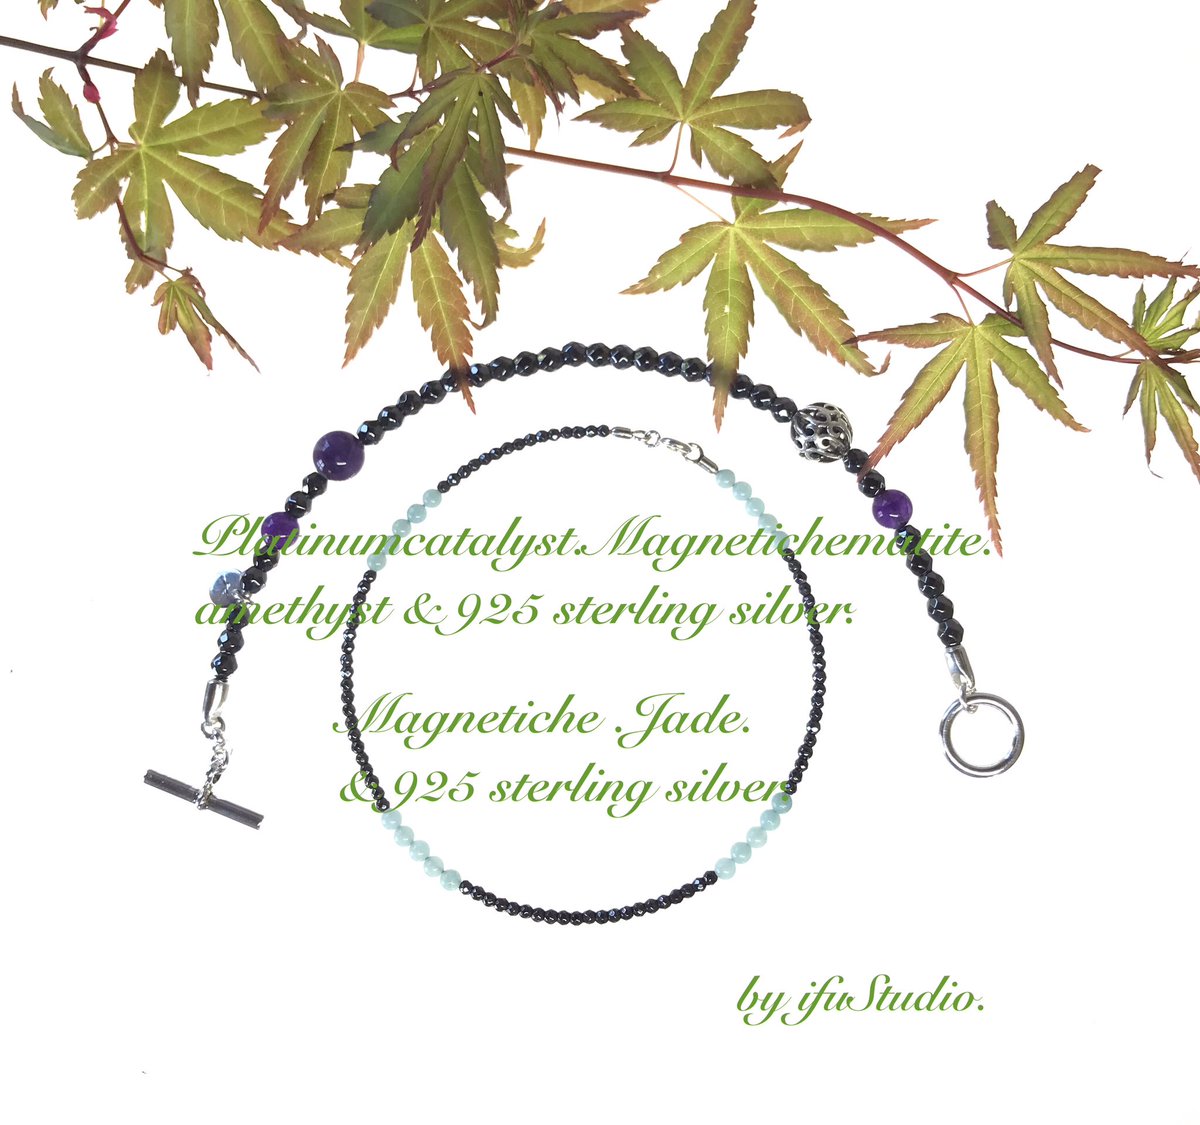 ifu工房 !
This bracelet can clean air❗️
anklet !
#空気清浄機能付きブレスレット❗️
#ifu工房 #ifuStudio #bracelet #Necklace #anklet #platinumcatalyst #cleanair